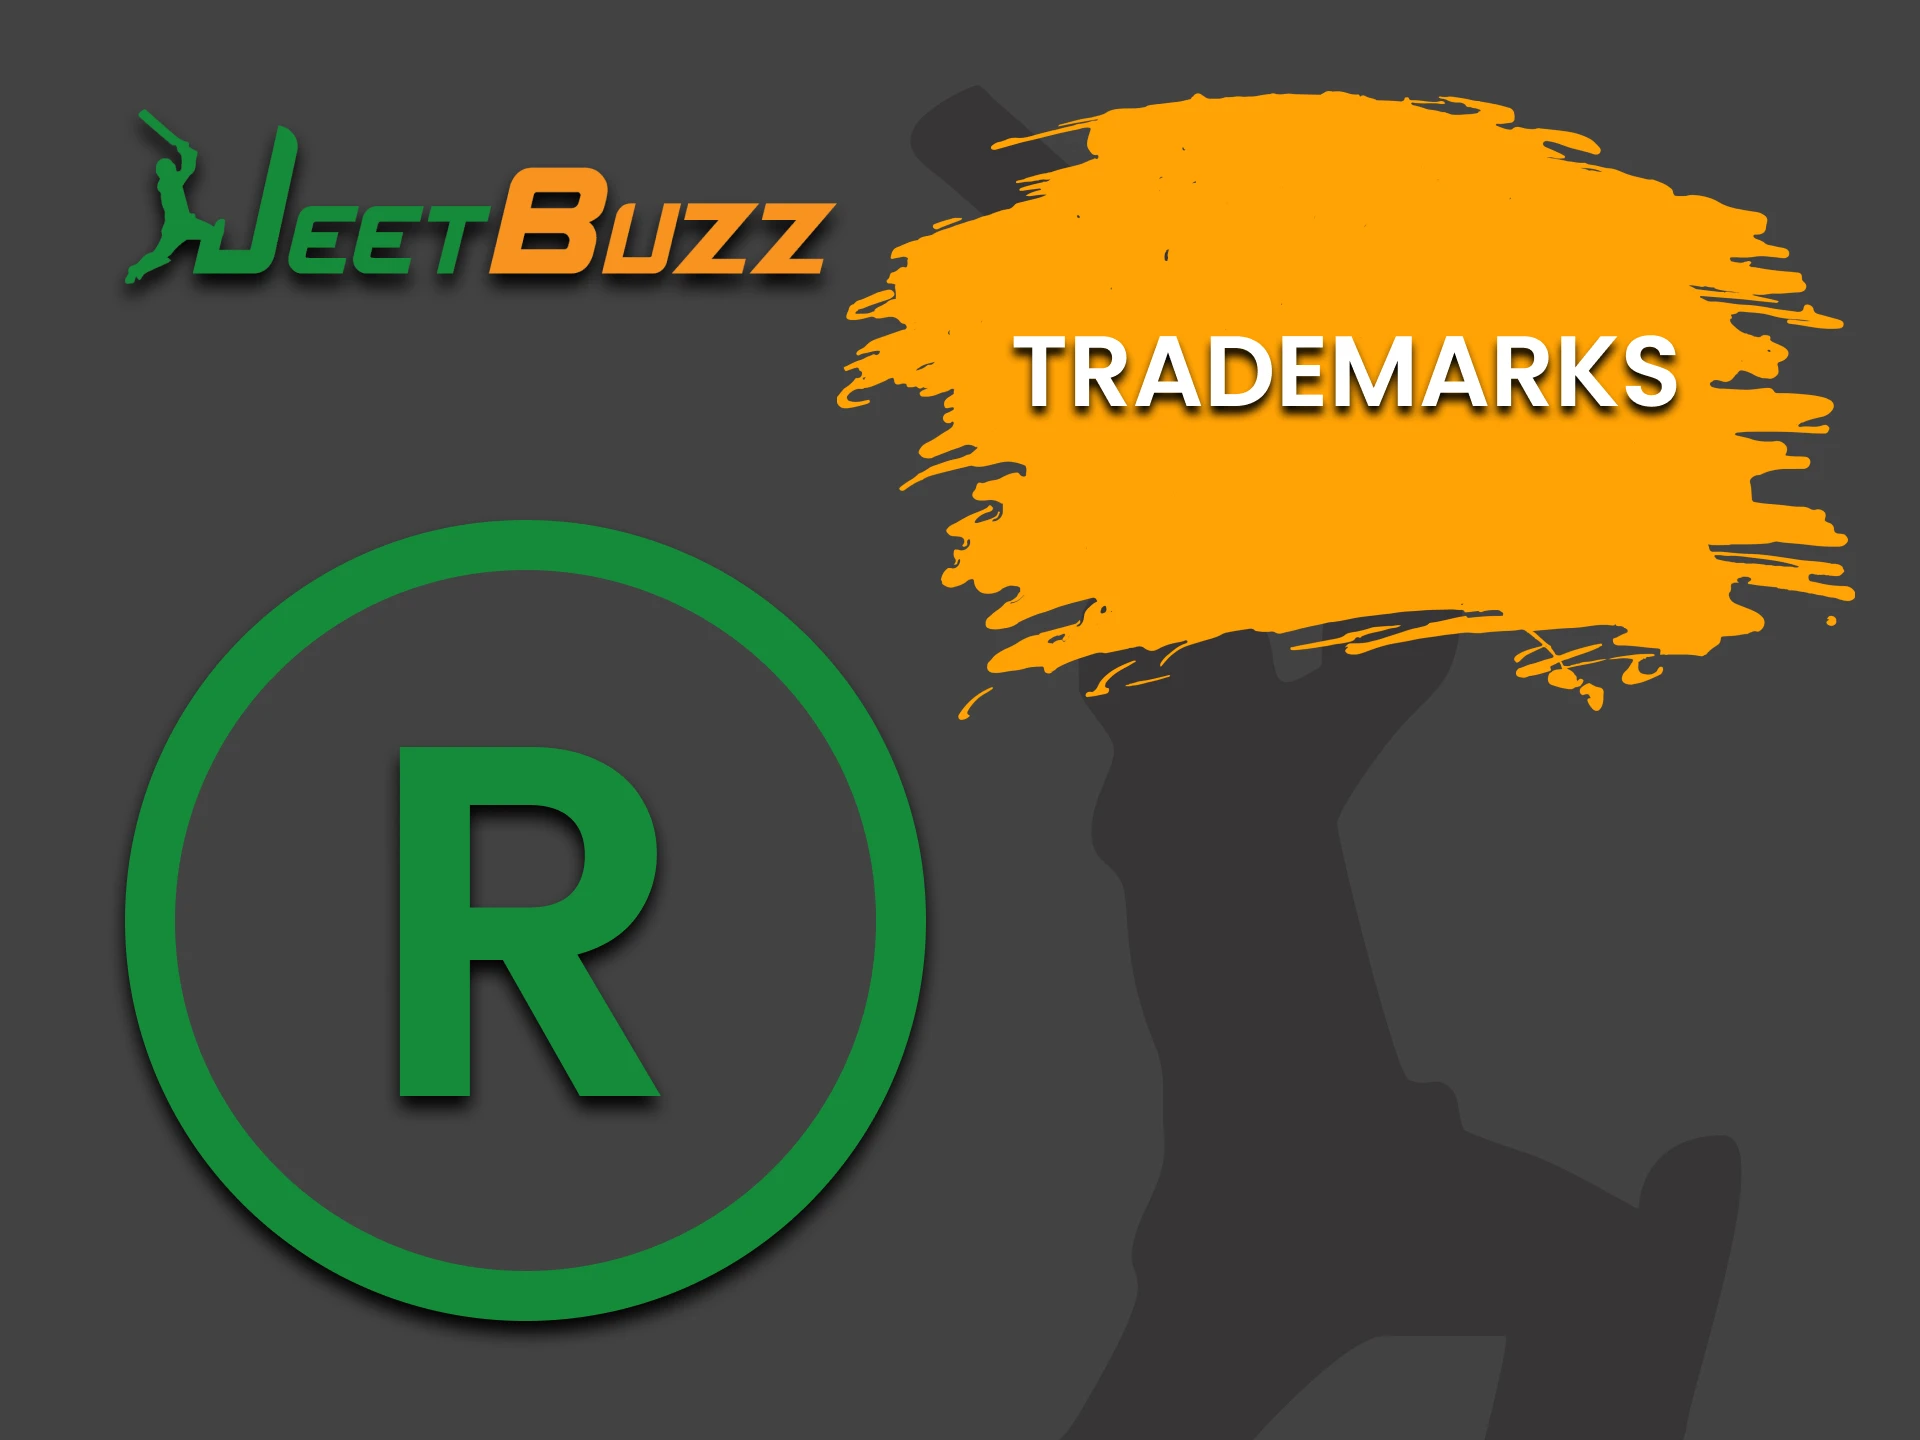 Find out who owns trademarks on the JeetBuzz website.